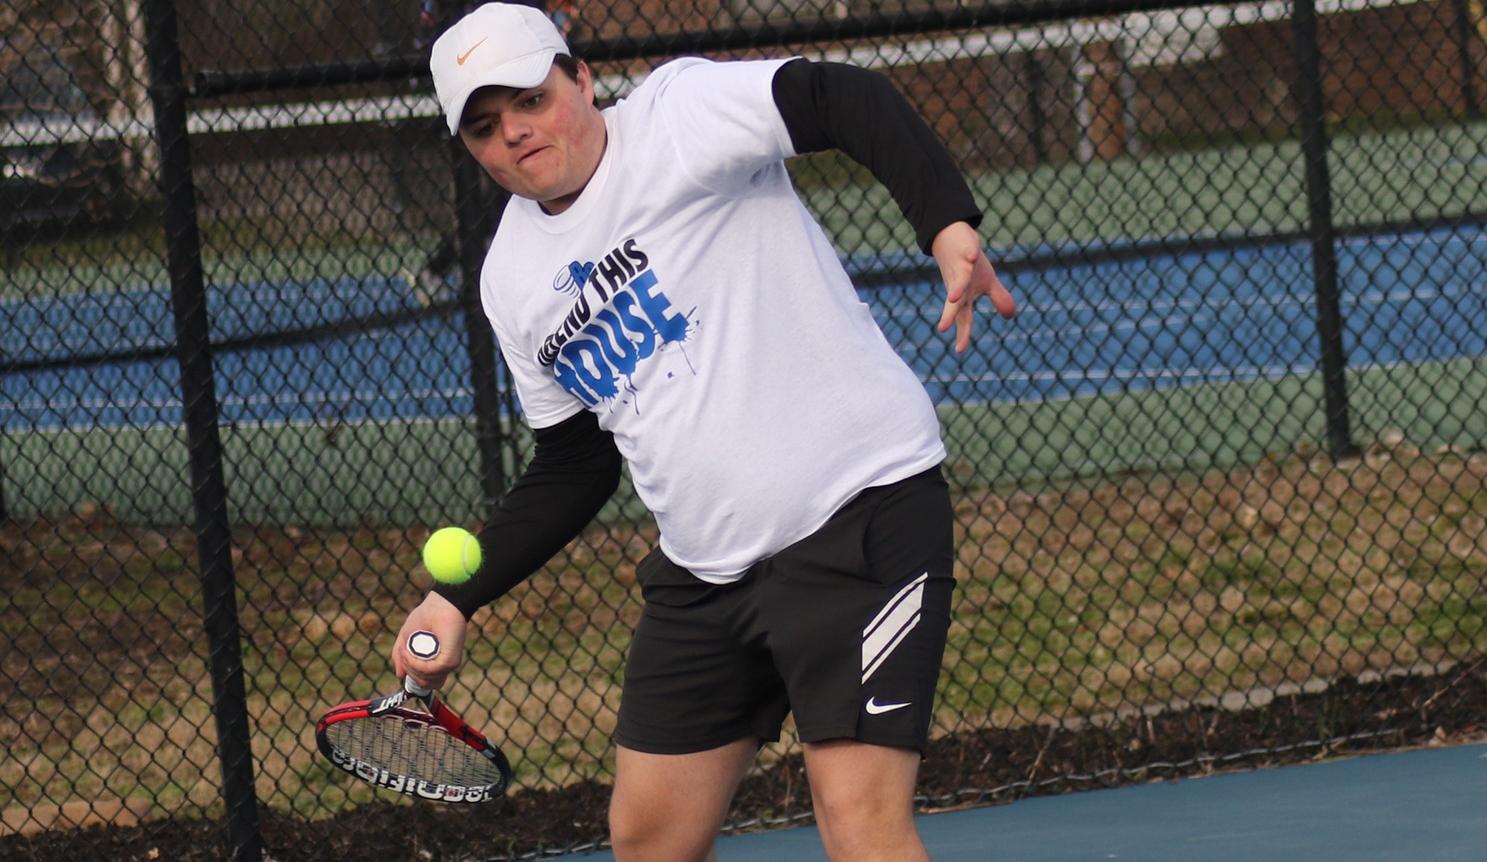 Jackson Ray won a three-set thriller against Pfeiffer at home (Photo courtesy of Dick Purselle).